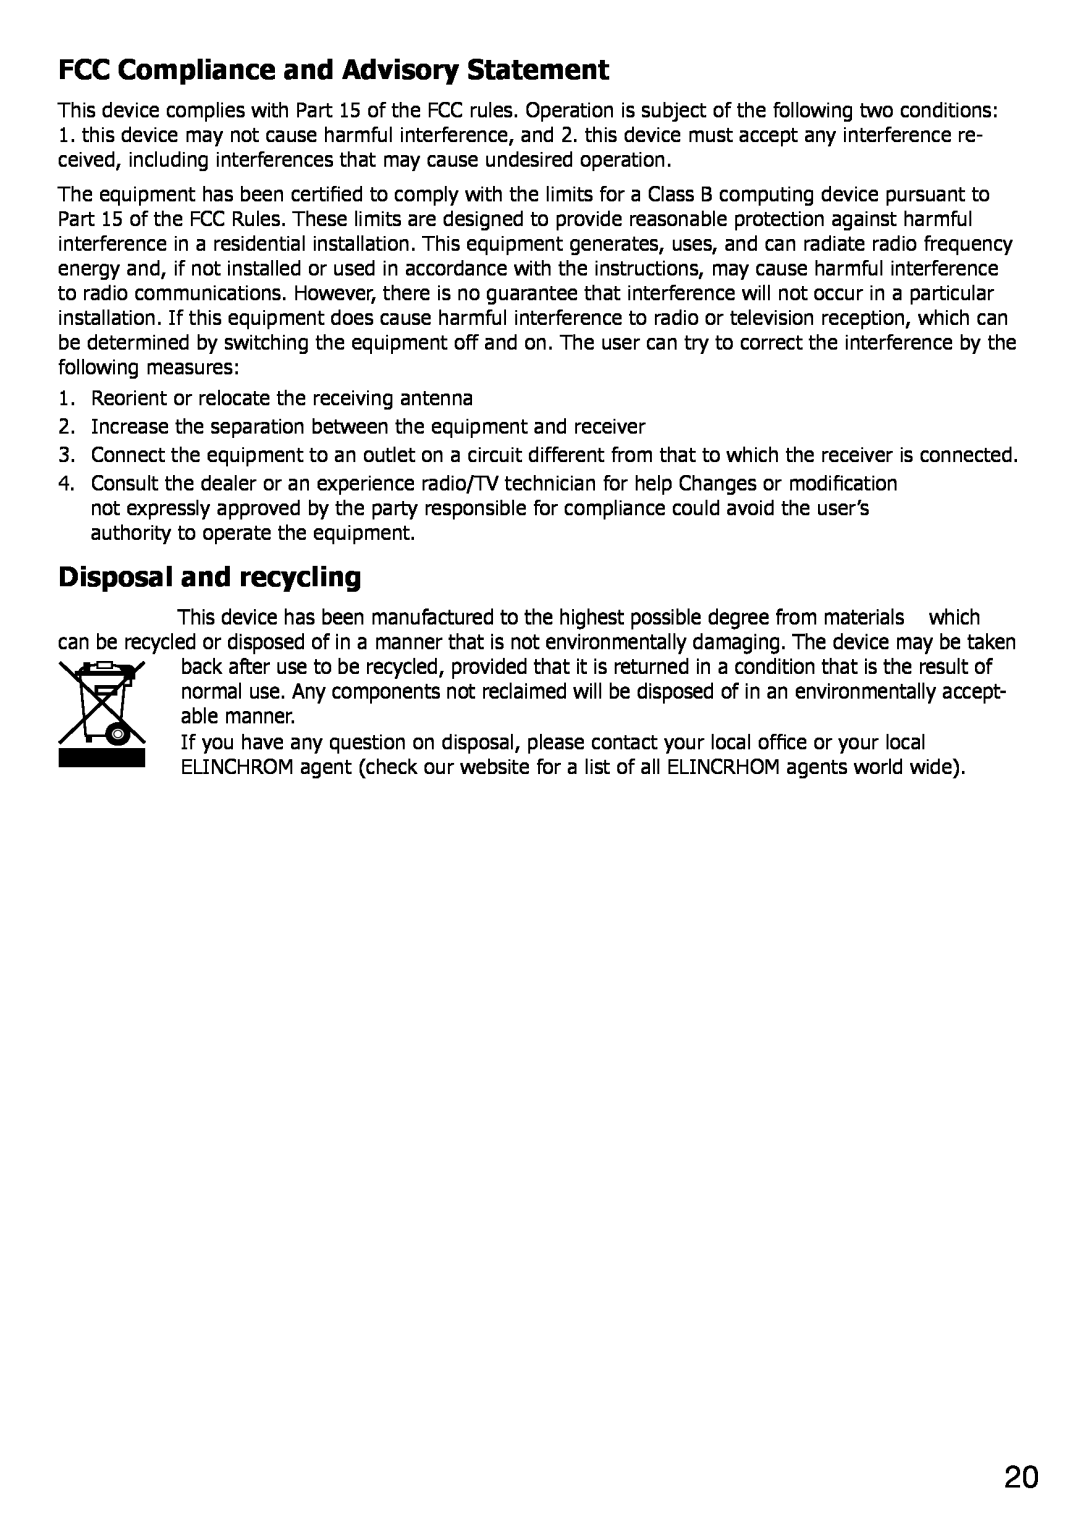 Elinchrom 4 IT, 2 IT operation manual FCC Compliance and Advisory Statement, Disposal and recycling 